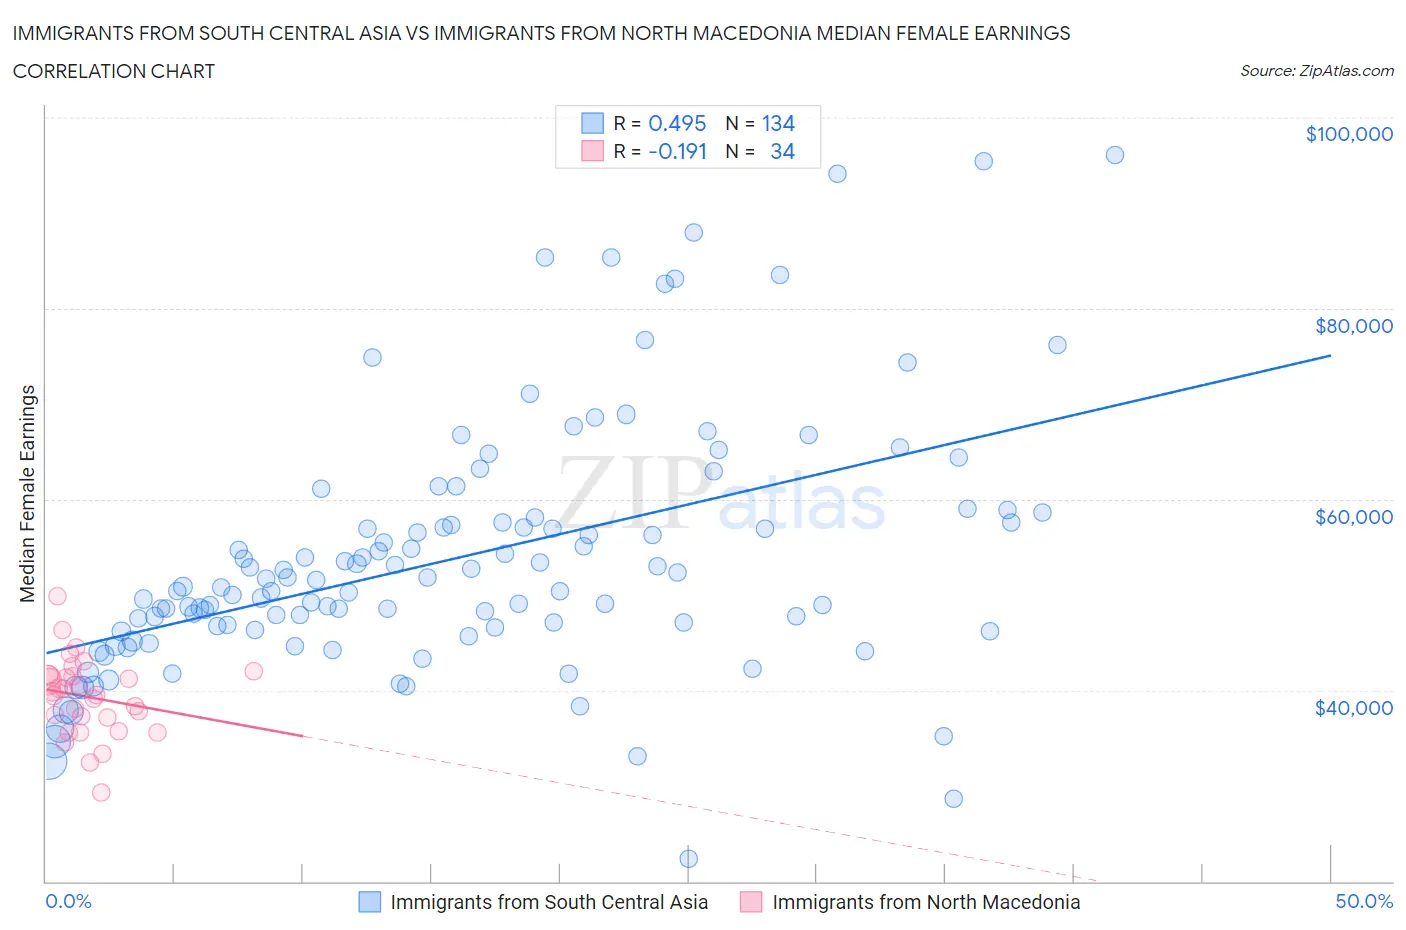 Immigrants from South Central Asia vs Immigrants from North Macedonia Median Female Earnings